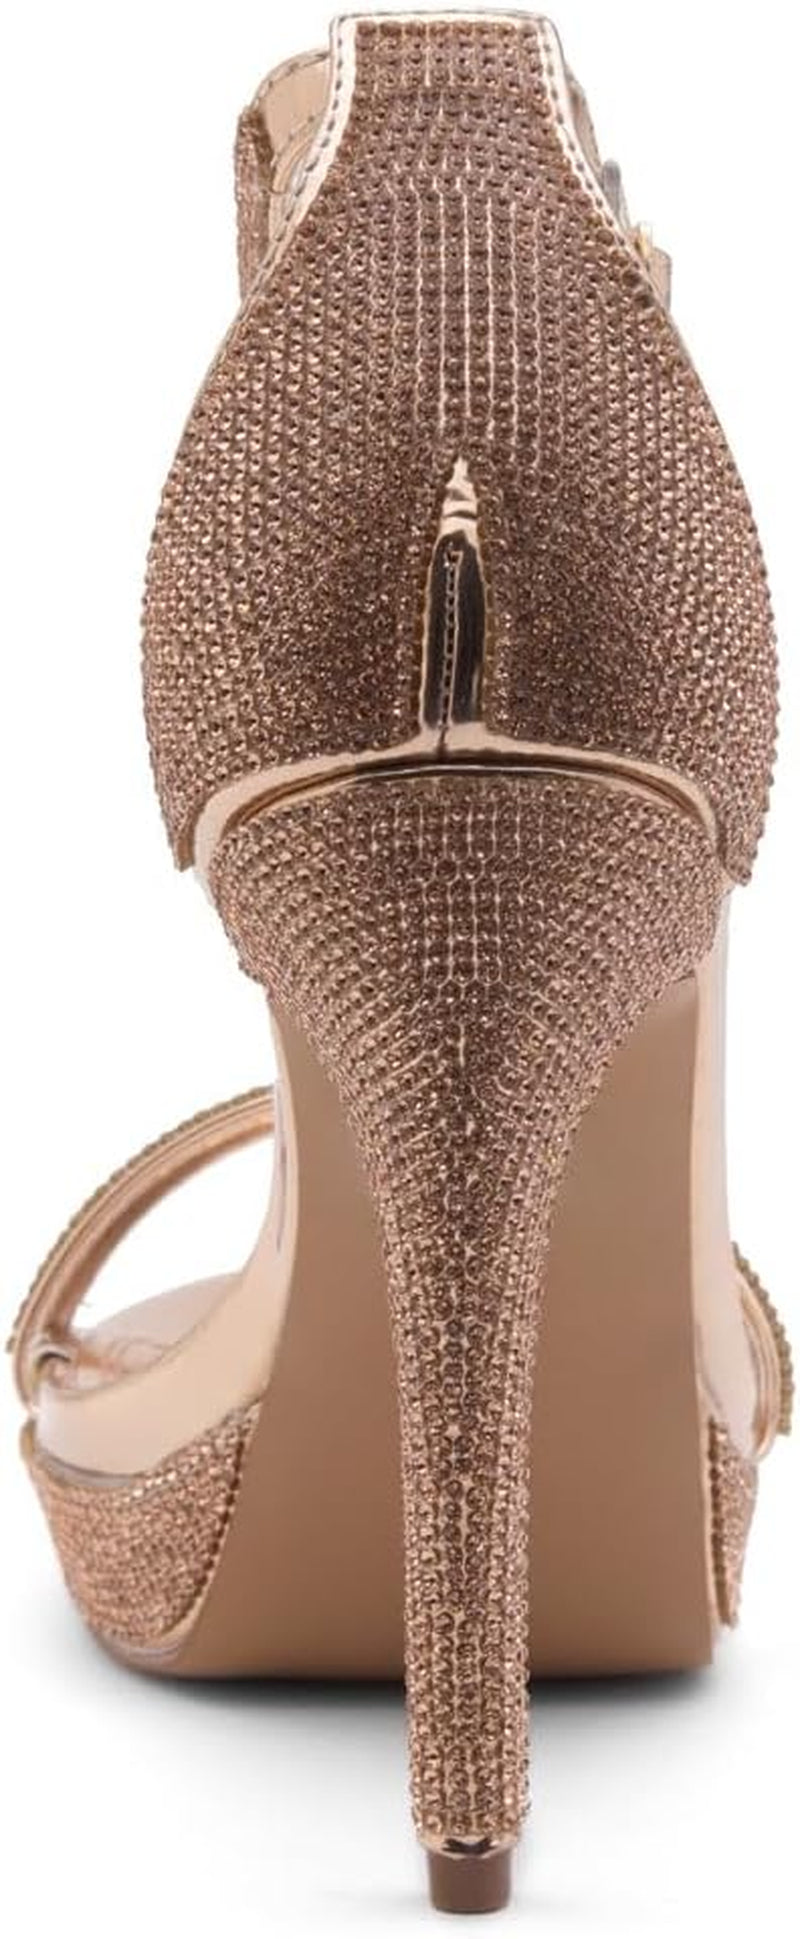 "Ultimate Elegance: Open Toe Stiletto Heel Sandals - Ideal for Weddings and Parties!"